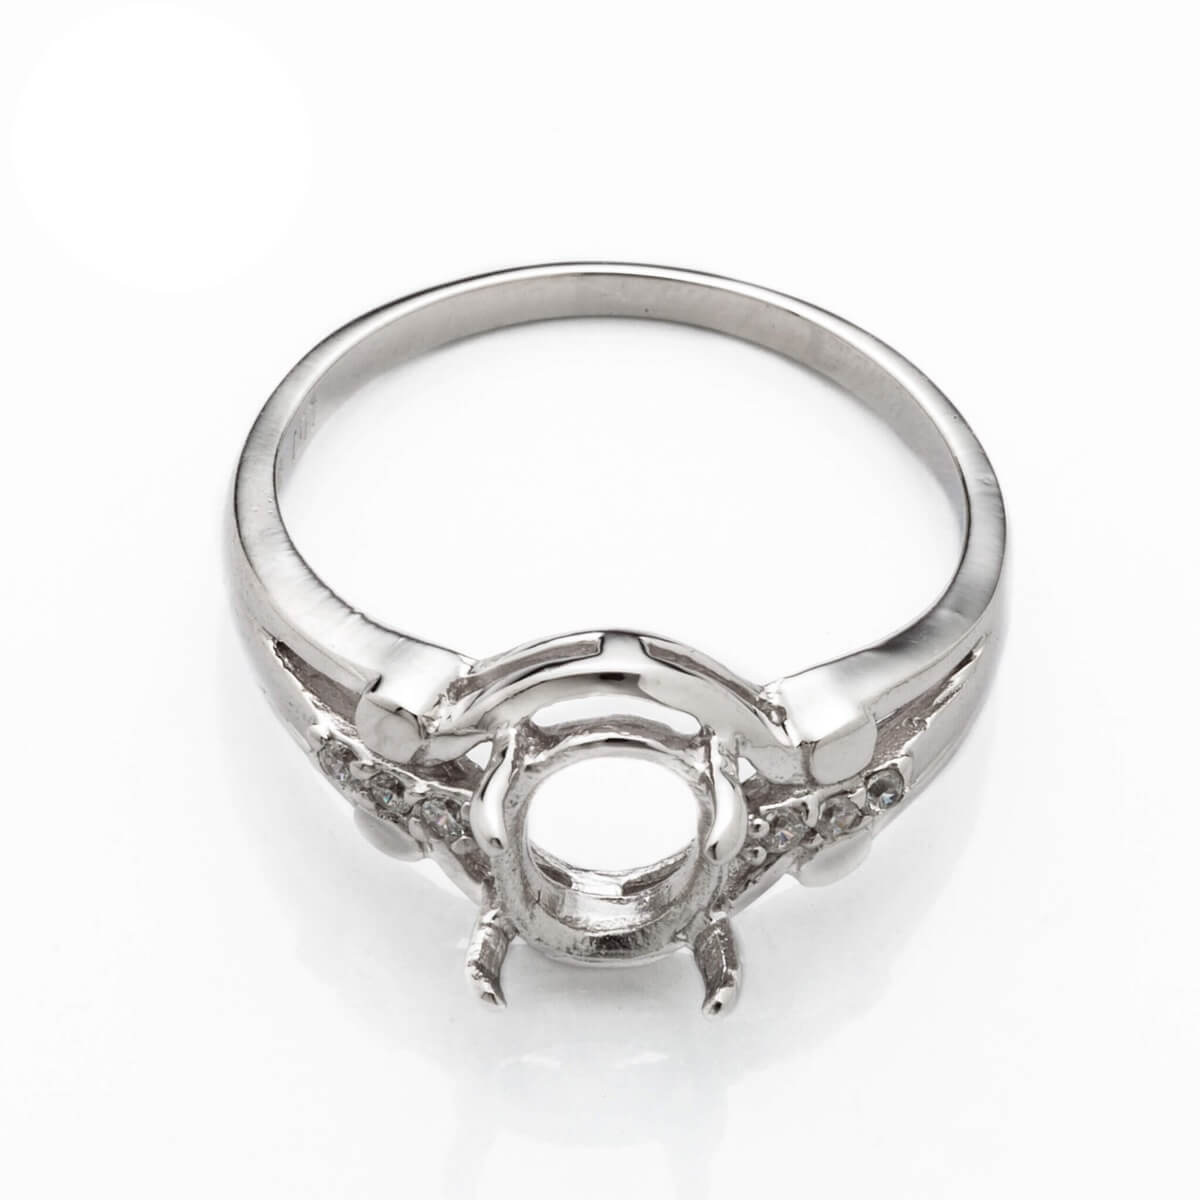 Hollow and Tapered Ring with Cubic Zirconia Inlays and Oval Prongs Mounting in Sterling Silver 6x8mm